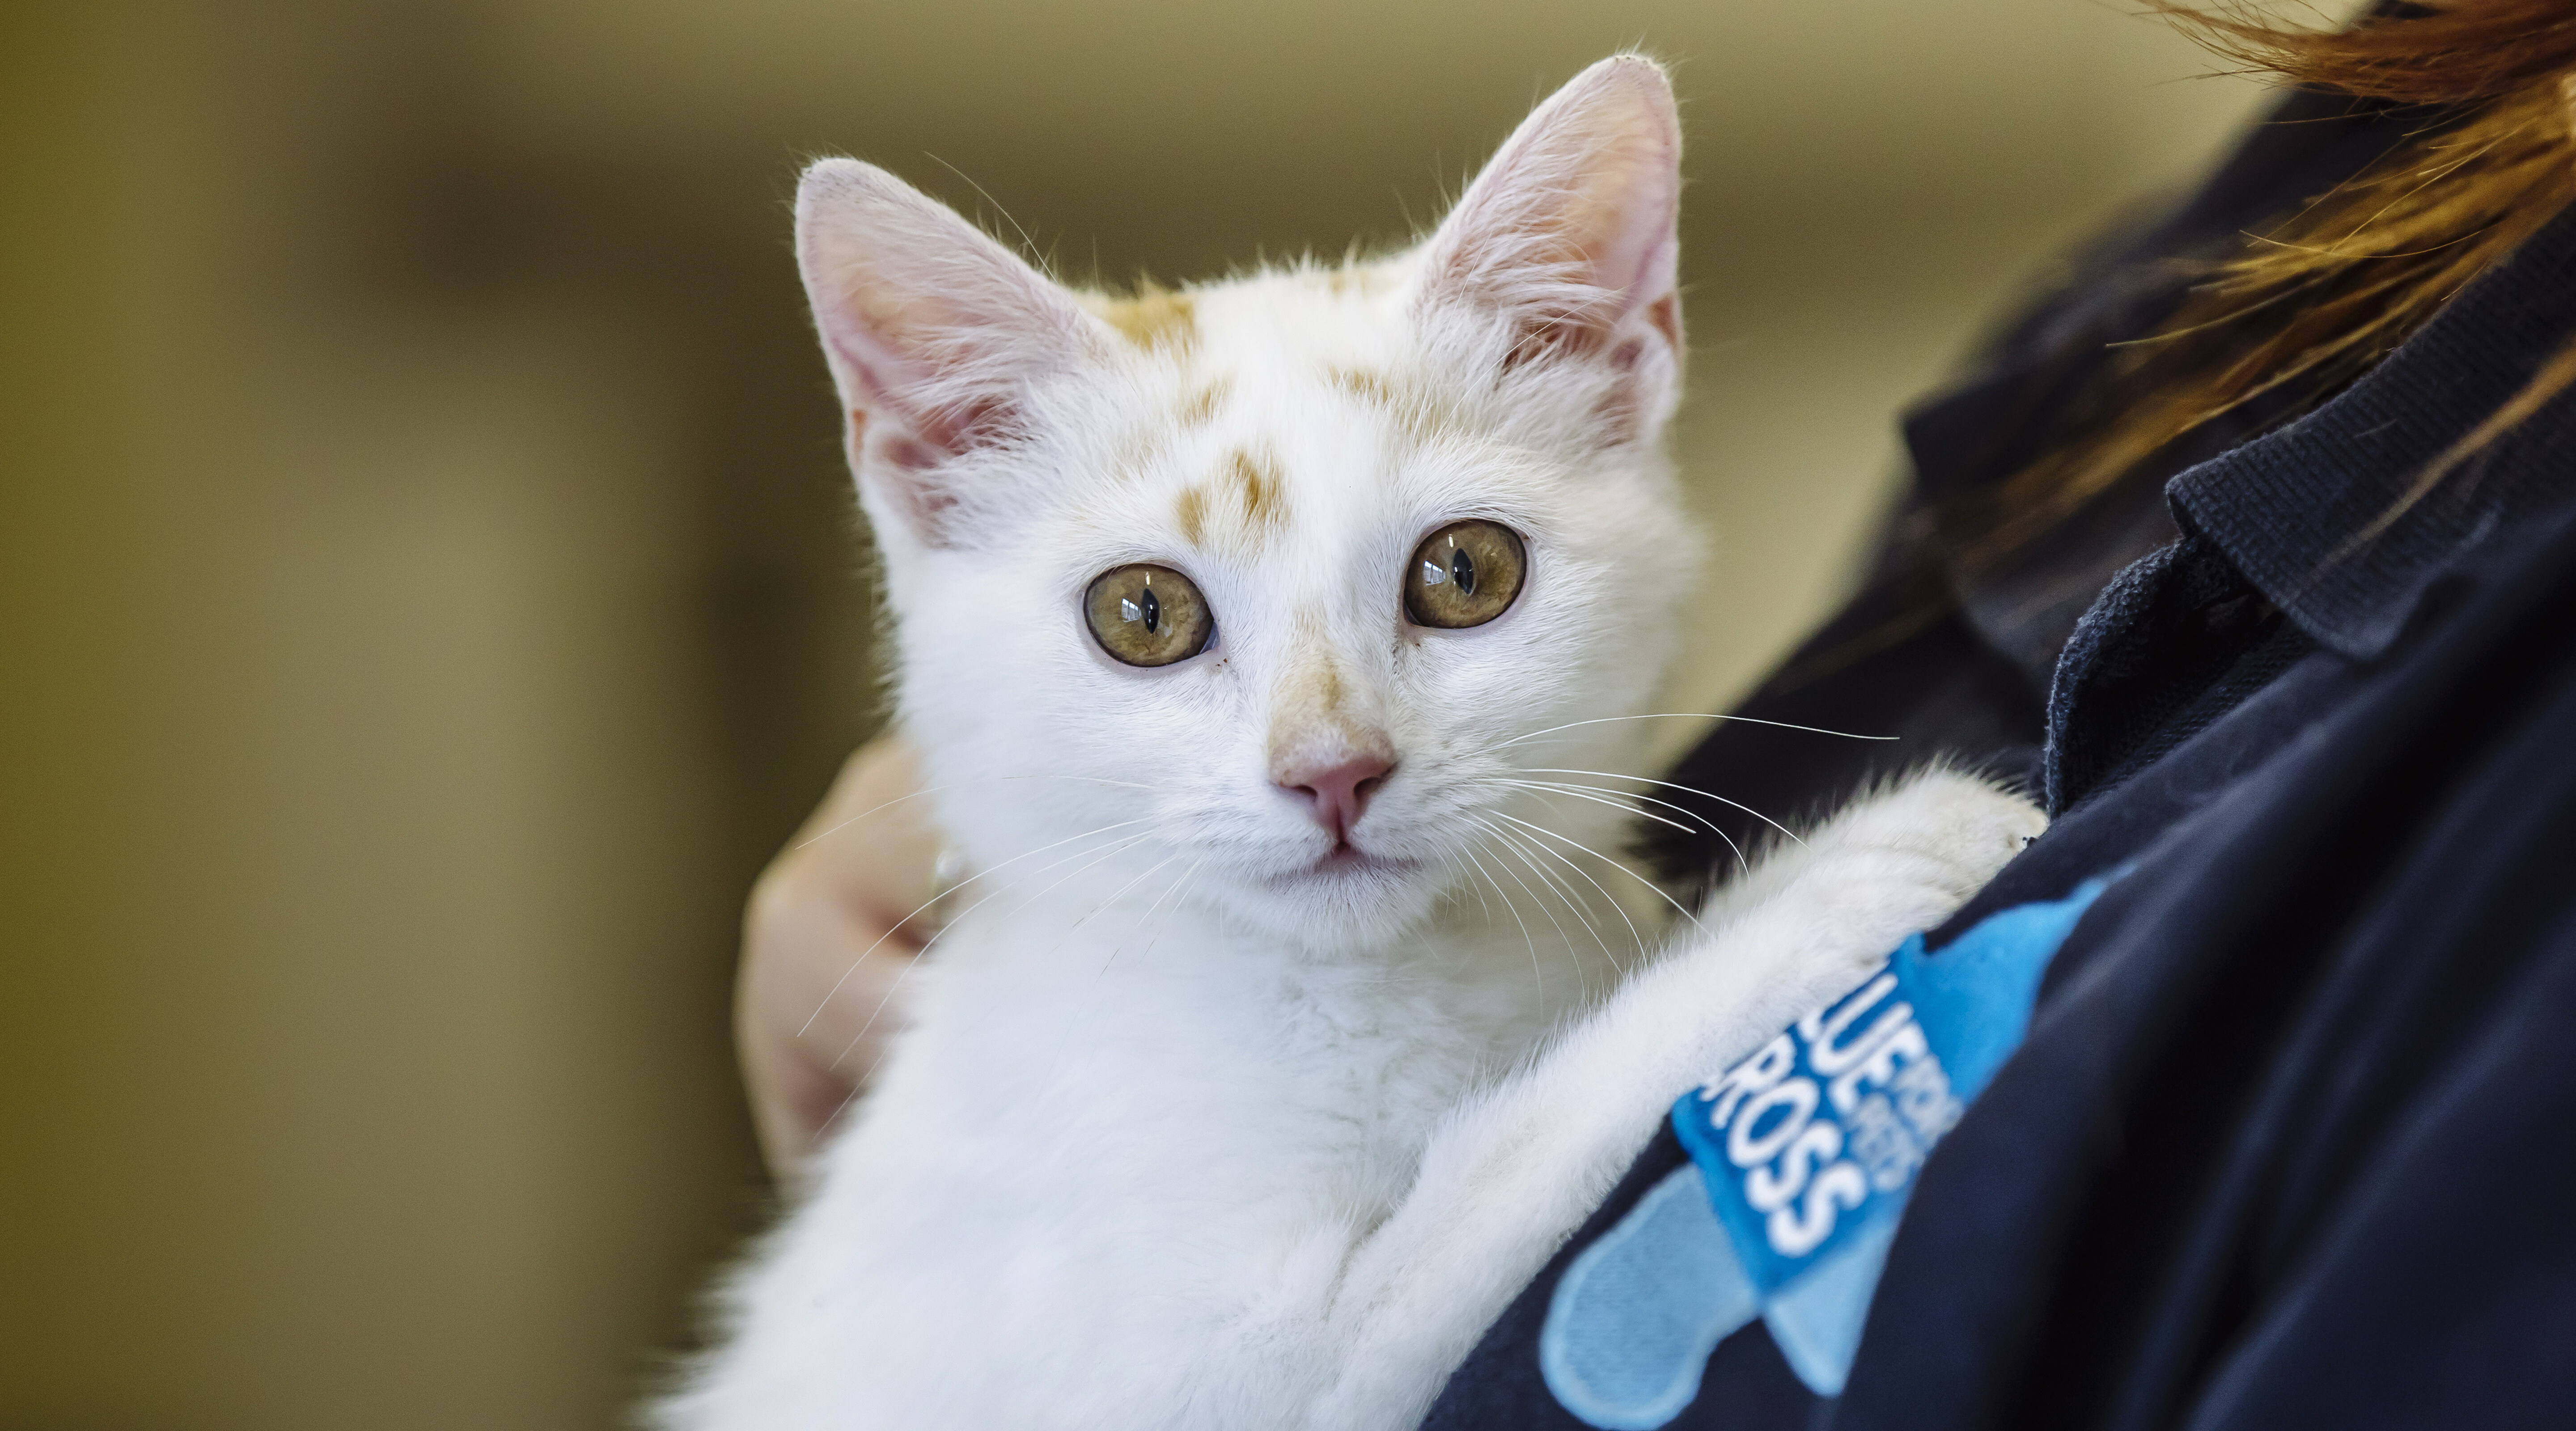 A white kitten with ginger flecks on her face is cuddled by a Blue Cross employee. The Blue Cross logo can be seen on the employee's uniform.